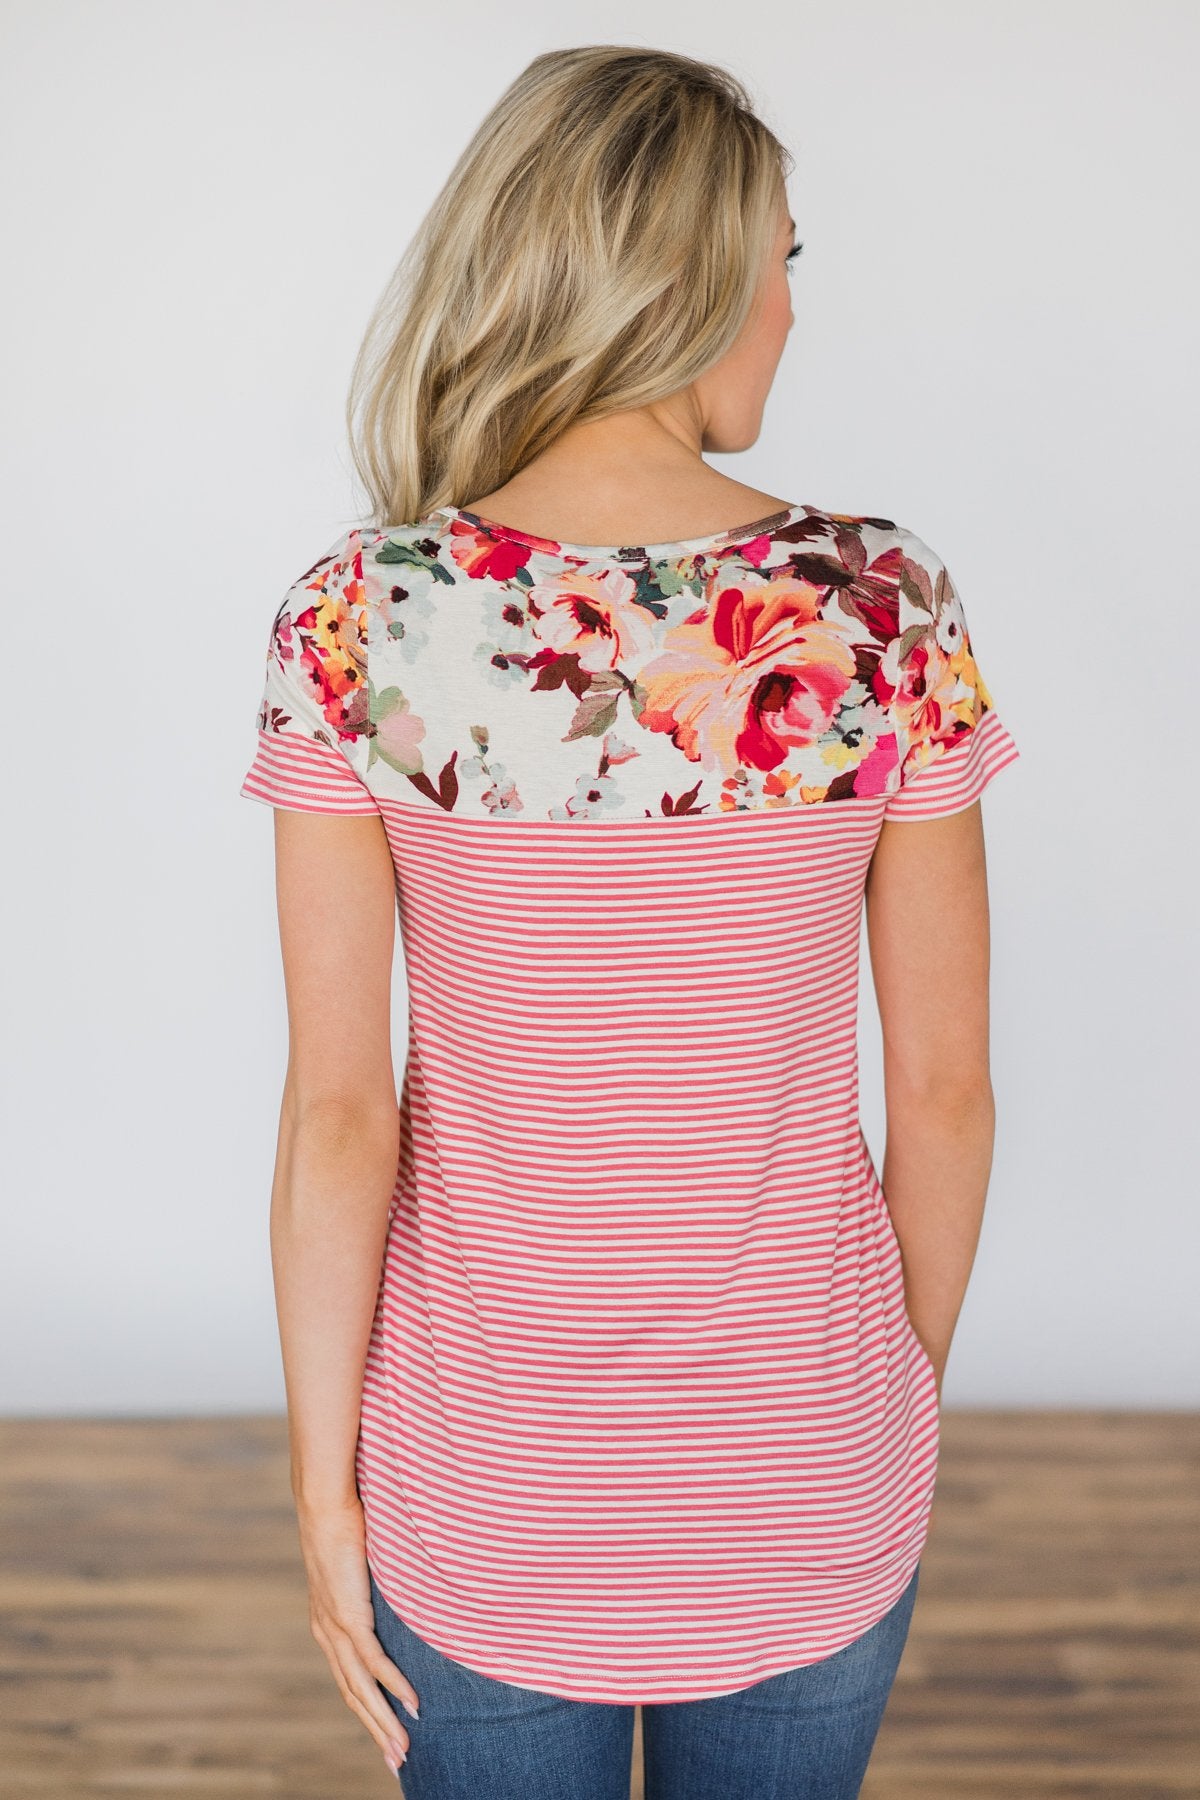 Somewhere in the Sun Floral & Stripes Pocket Top